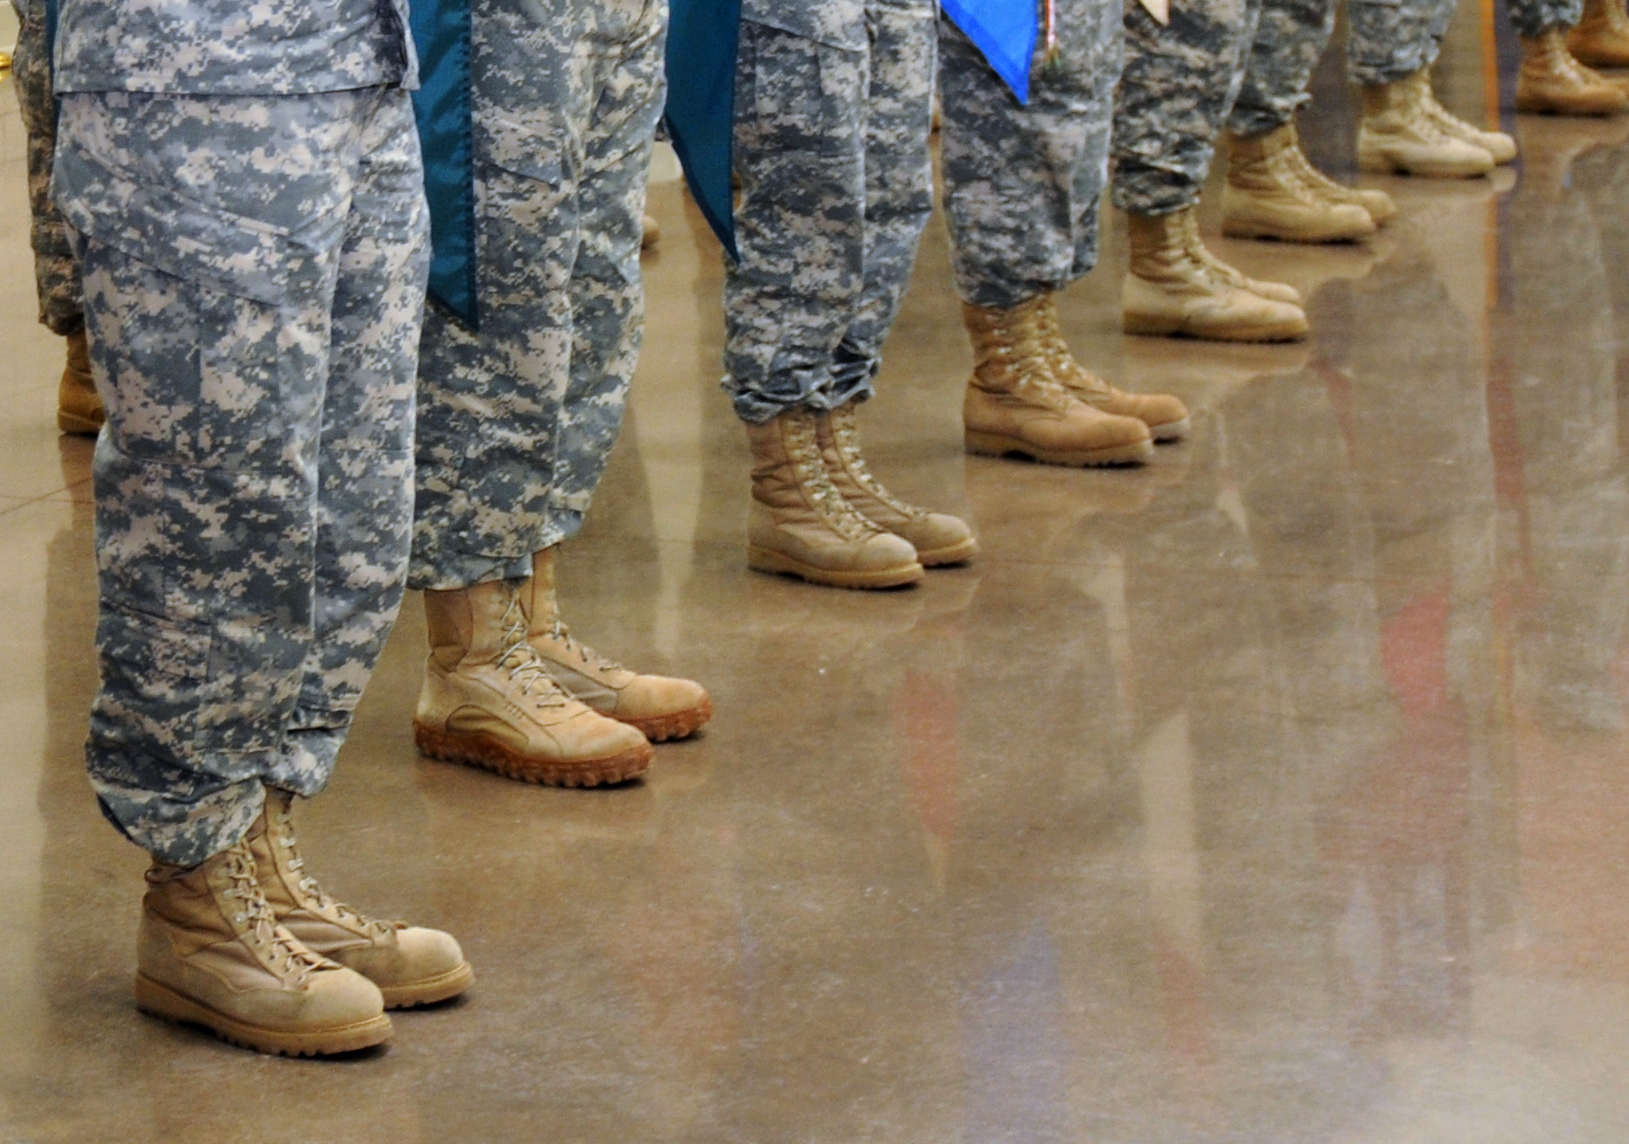 Wisconsin National Guard Sexual Assault, Harassment Policies To Undergo Federal Review